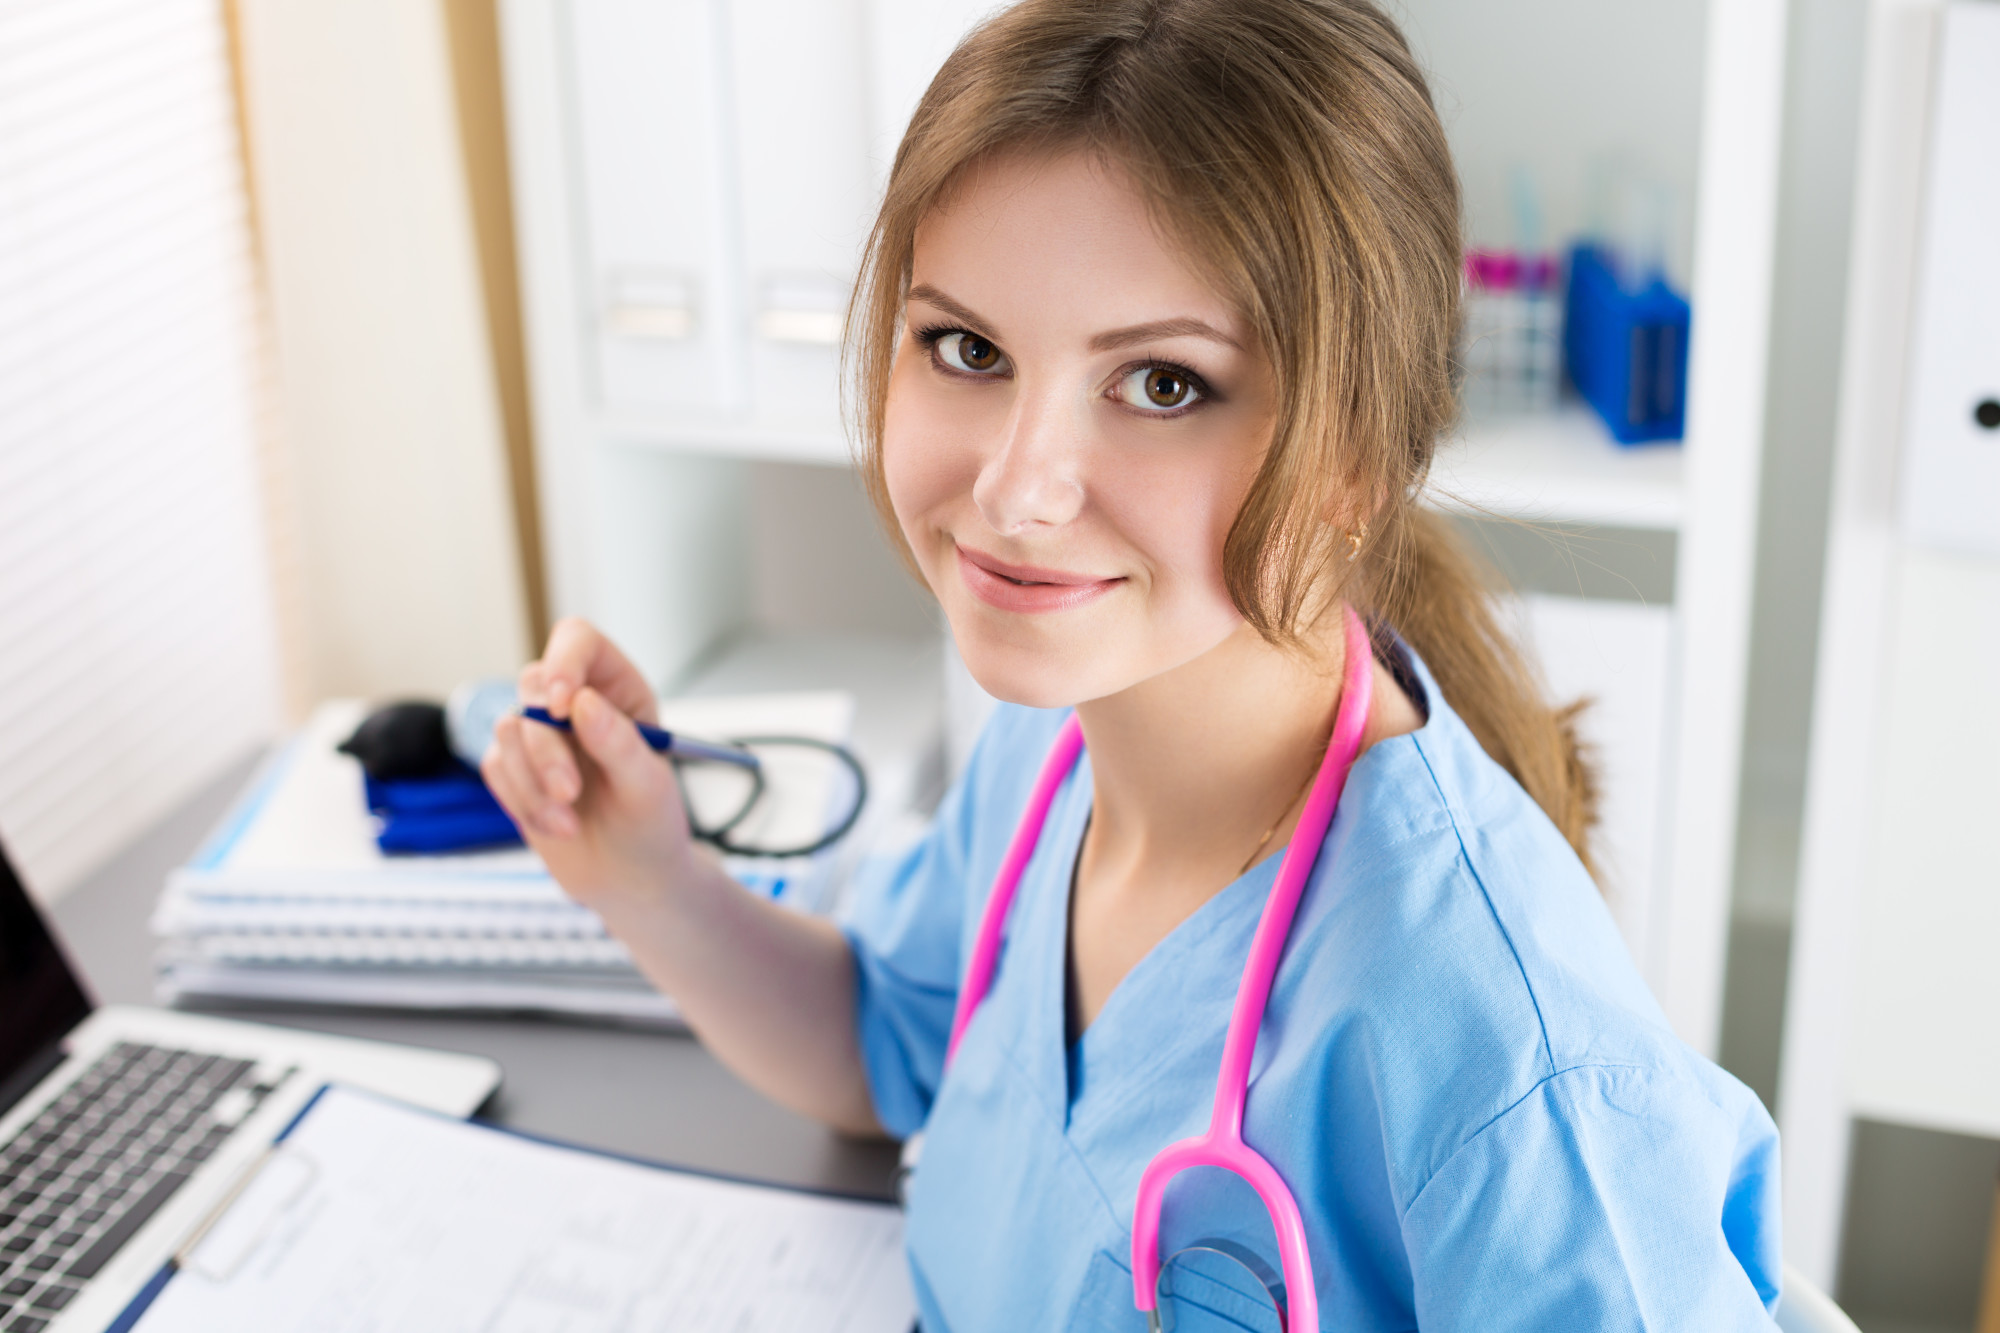 A full guide to Medical assistant career